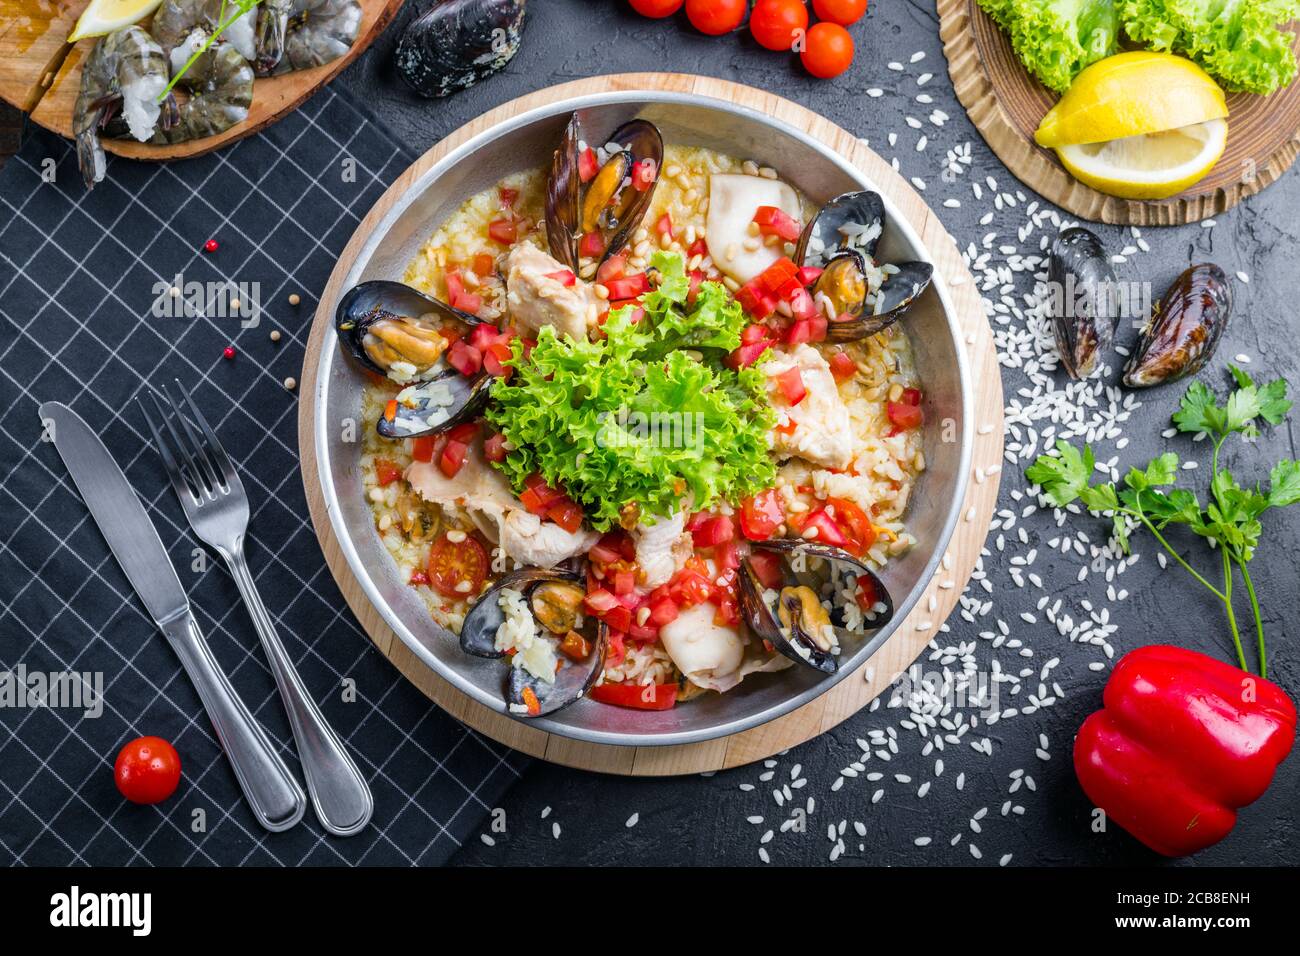 Risotto with seafood. Rice with mussels and shrimps. Stock Photo